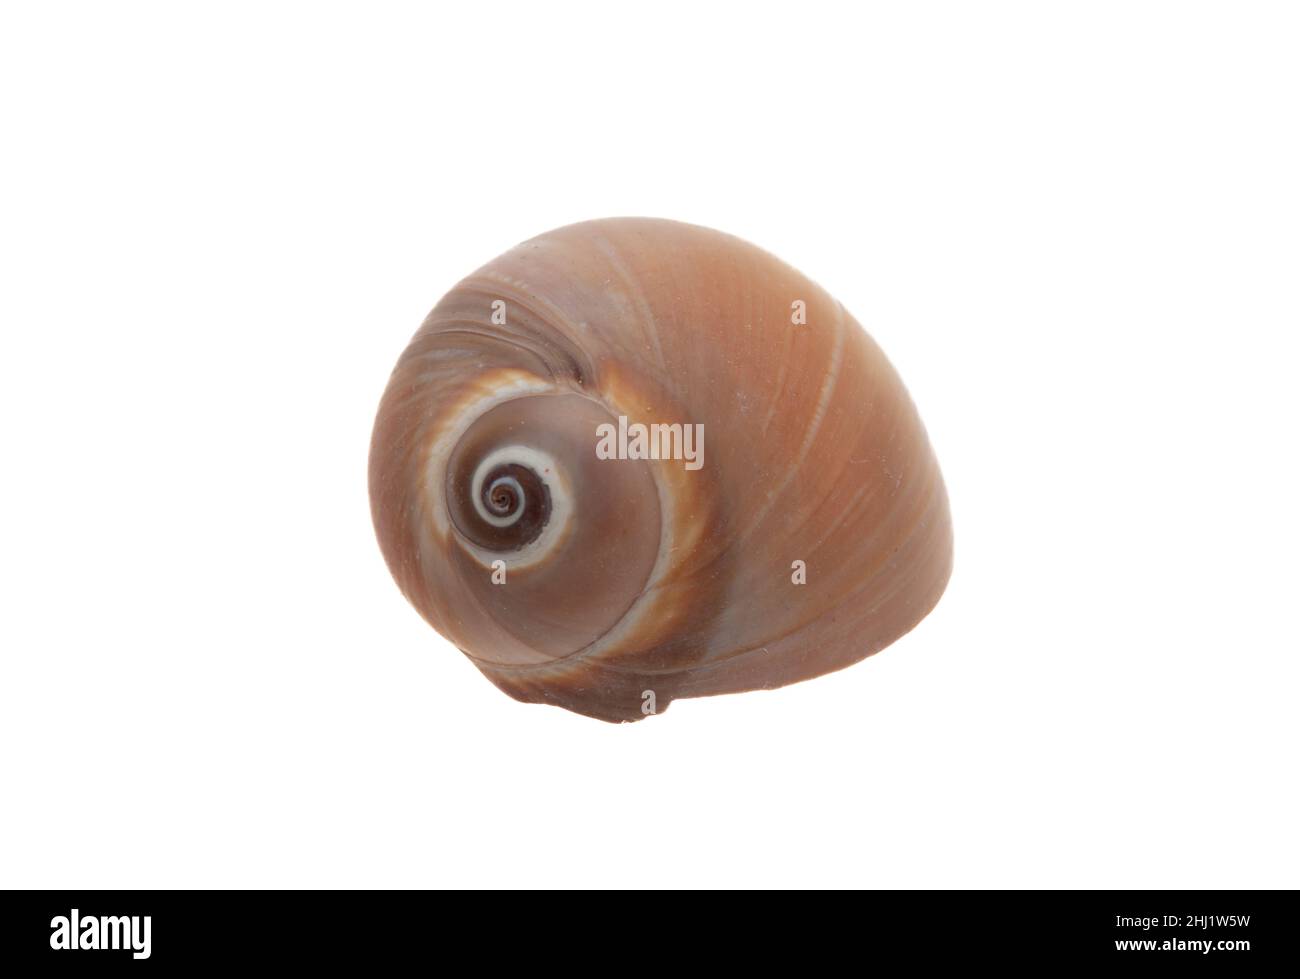 Fresh water snail isolated cutout on white background. Overhead view of circular brown gastropod mollusk that lives in pond, river, lake. Stock Photo